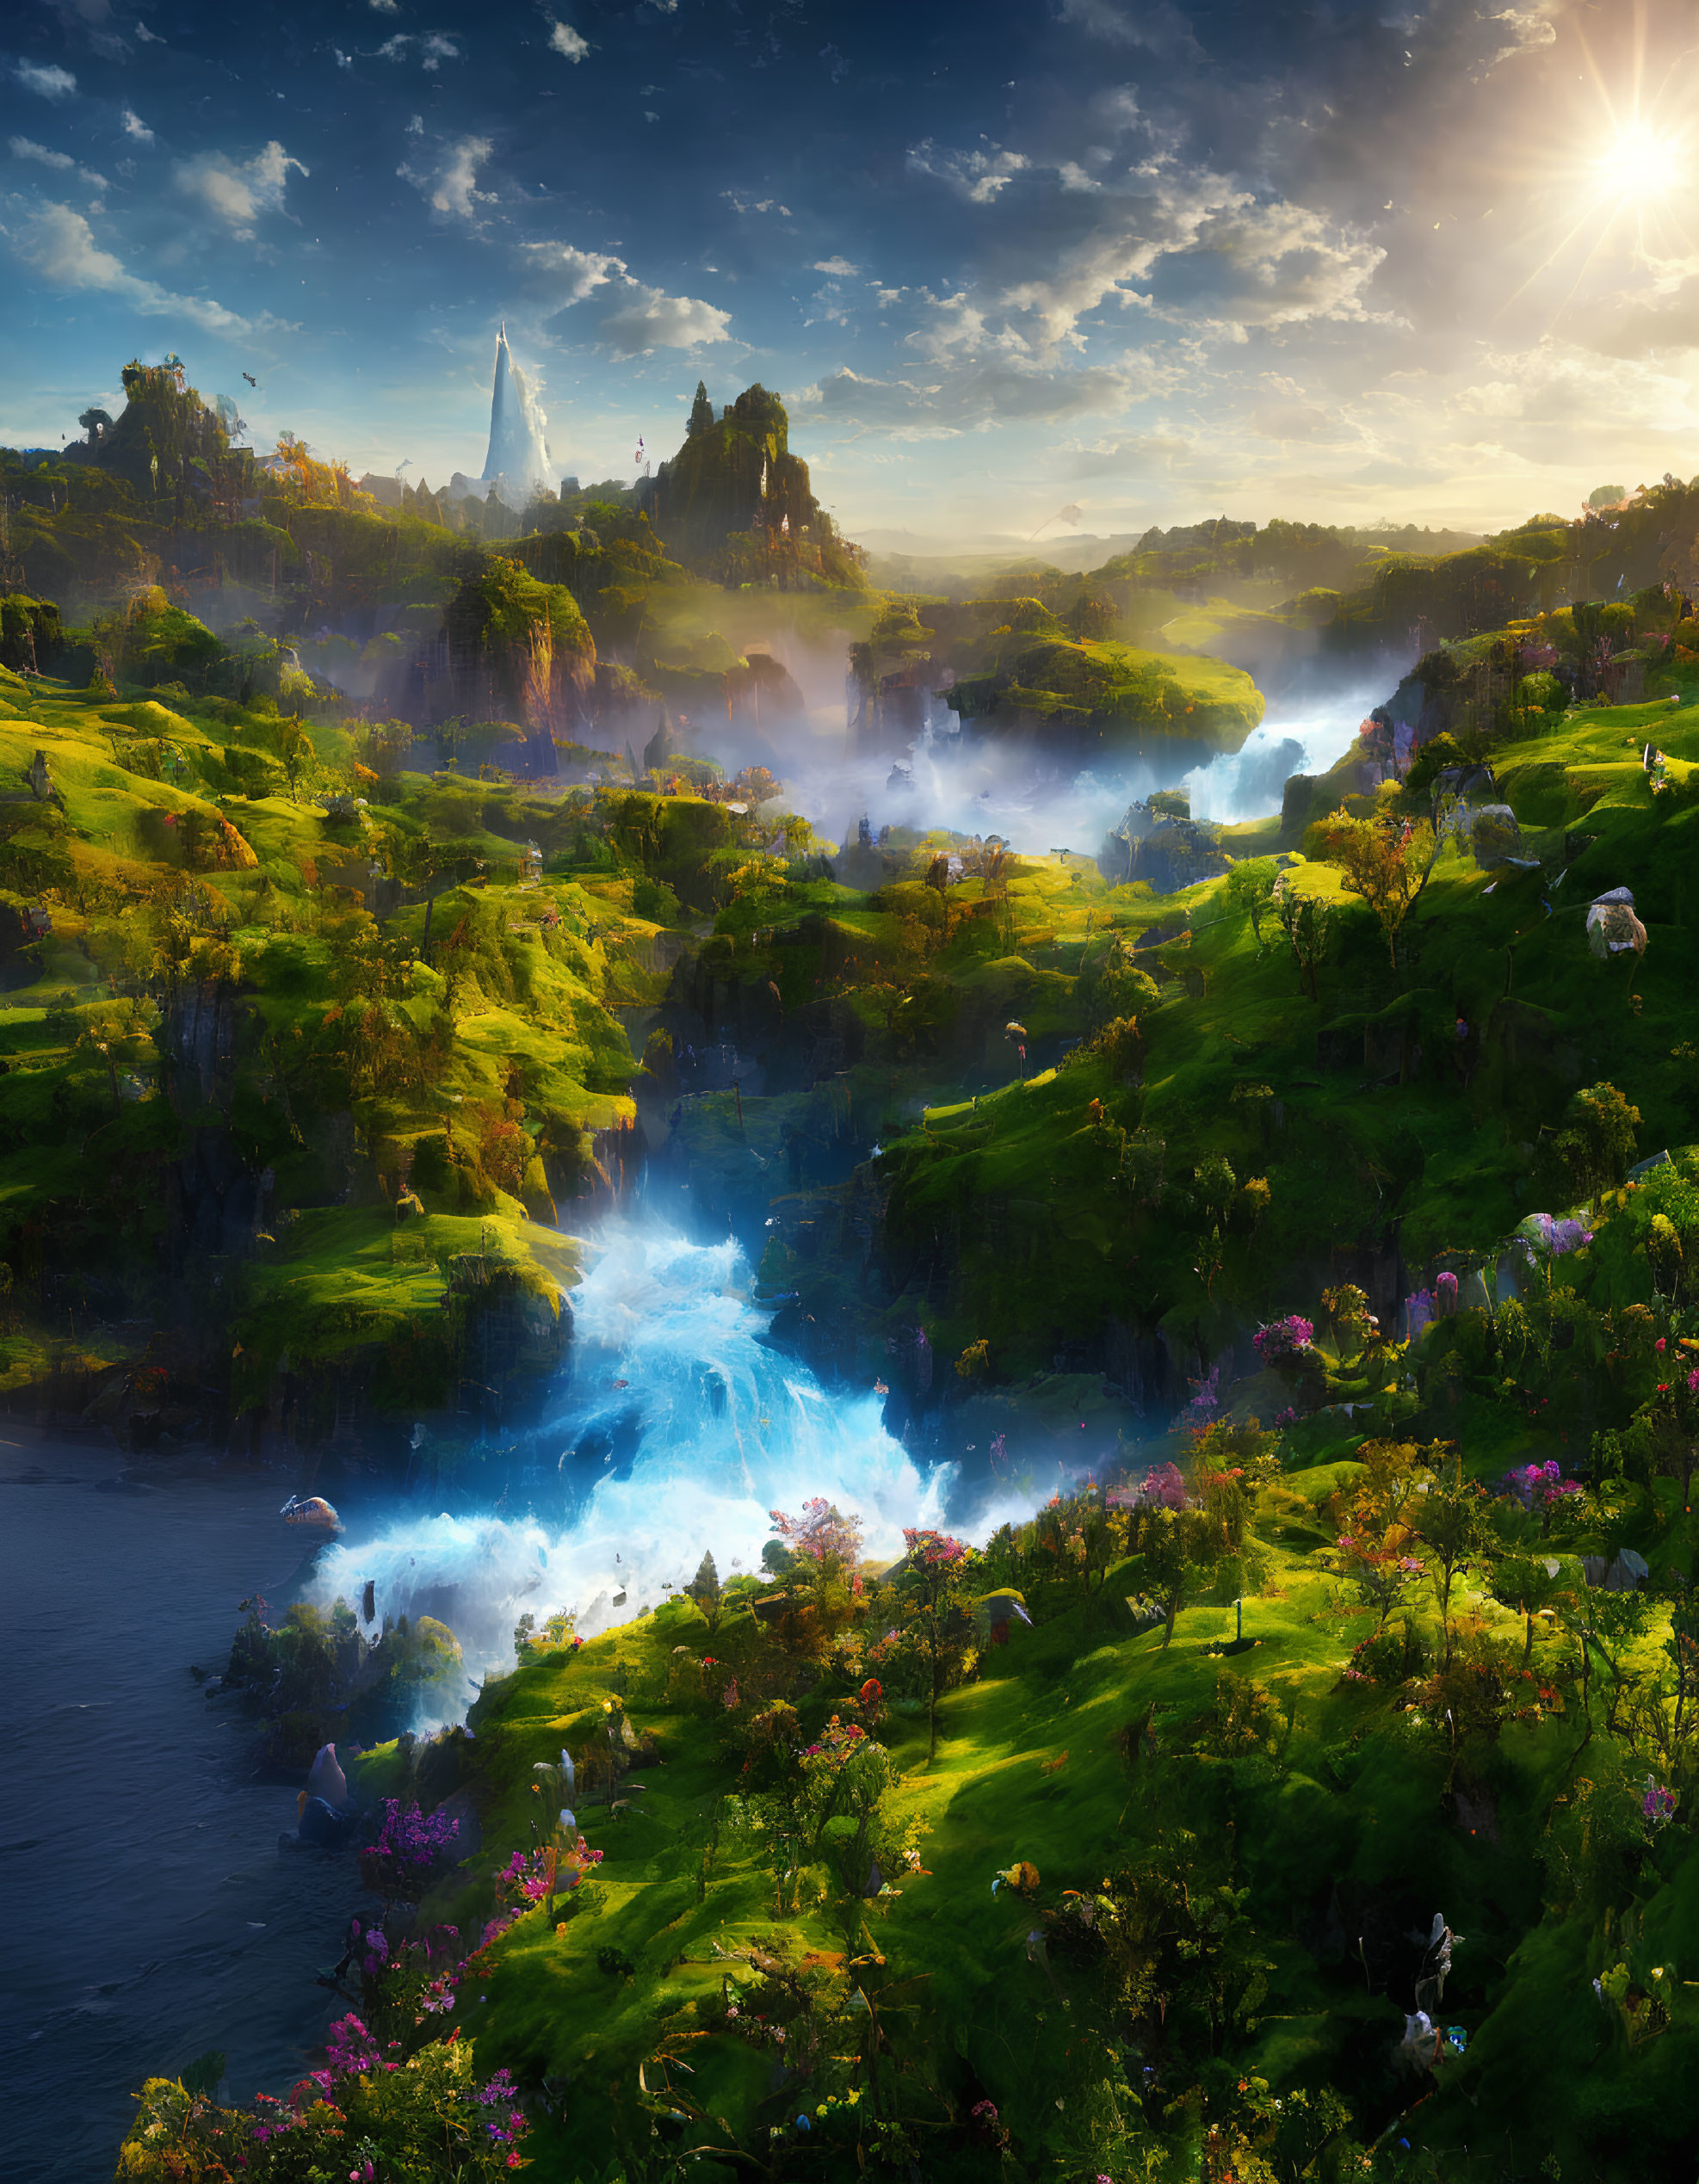 Fantasy landscape with greenery, waterfalls, river, mist, and sun